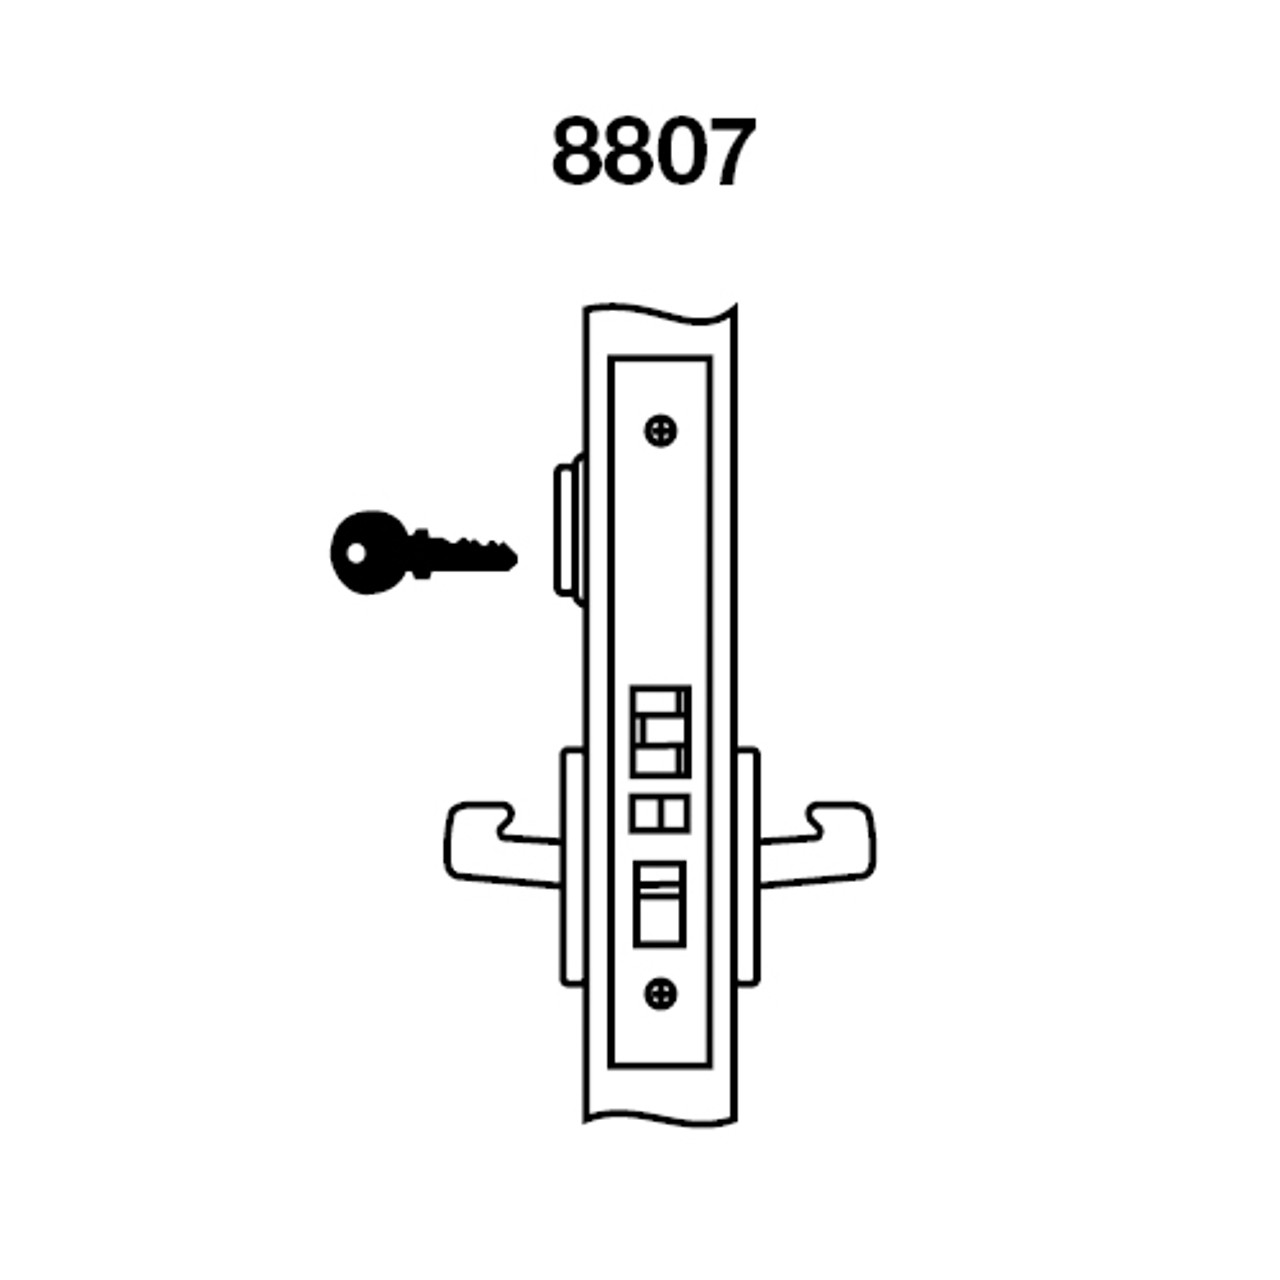 PBR8807FL-619 Yale 8800FL Series Single Cylinder Mortise Entrance Locks with Pacific Beach Lever in Satin Nickel